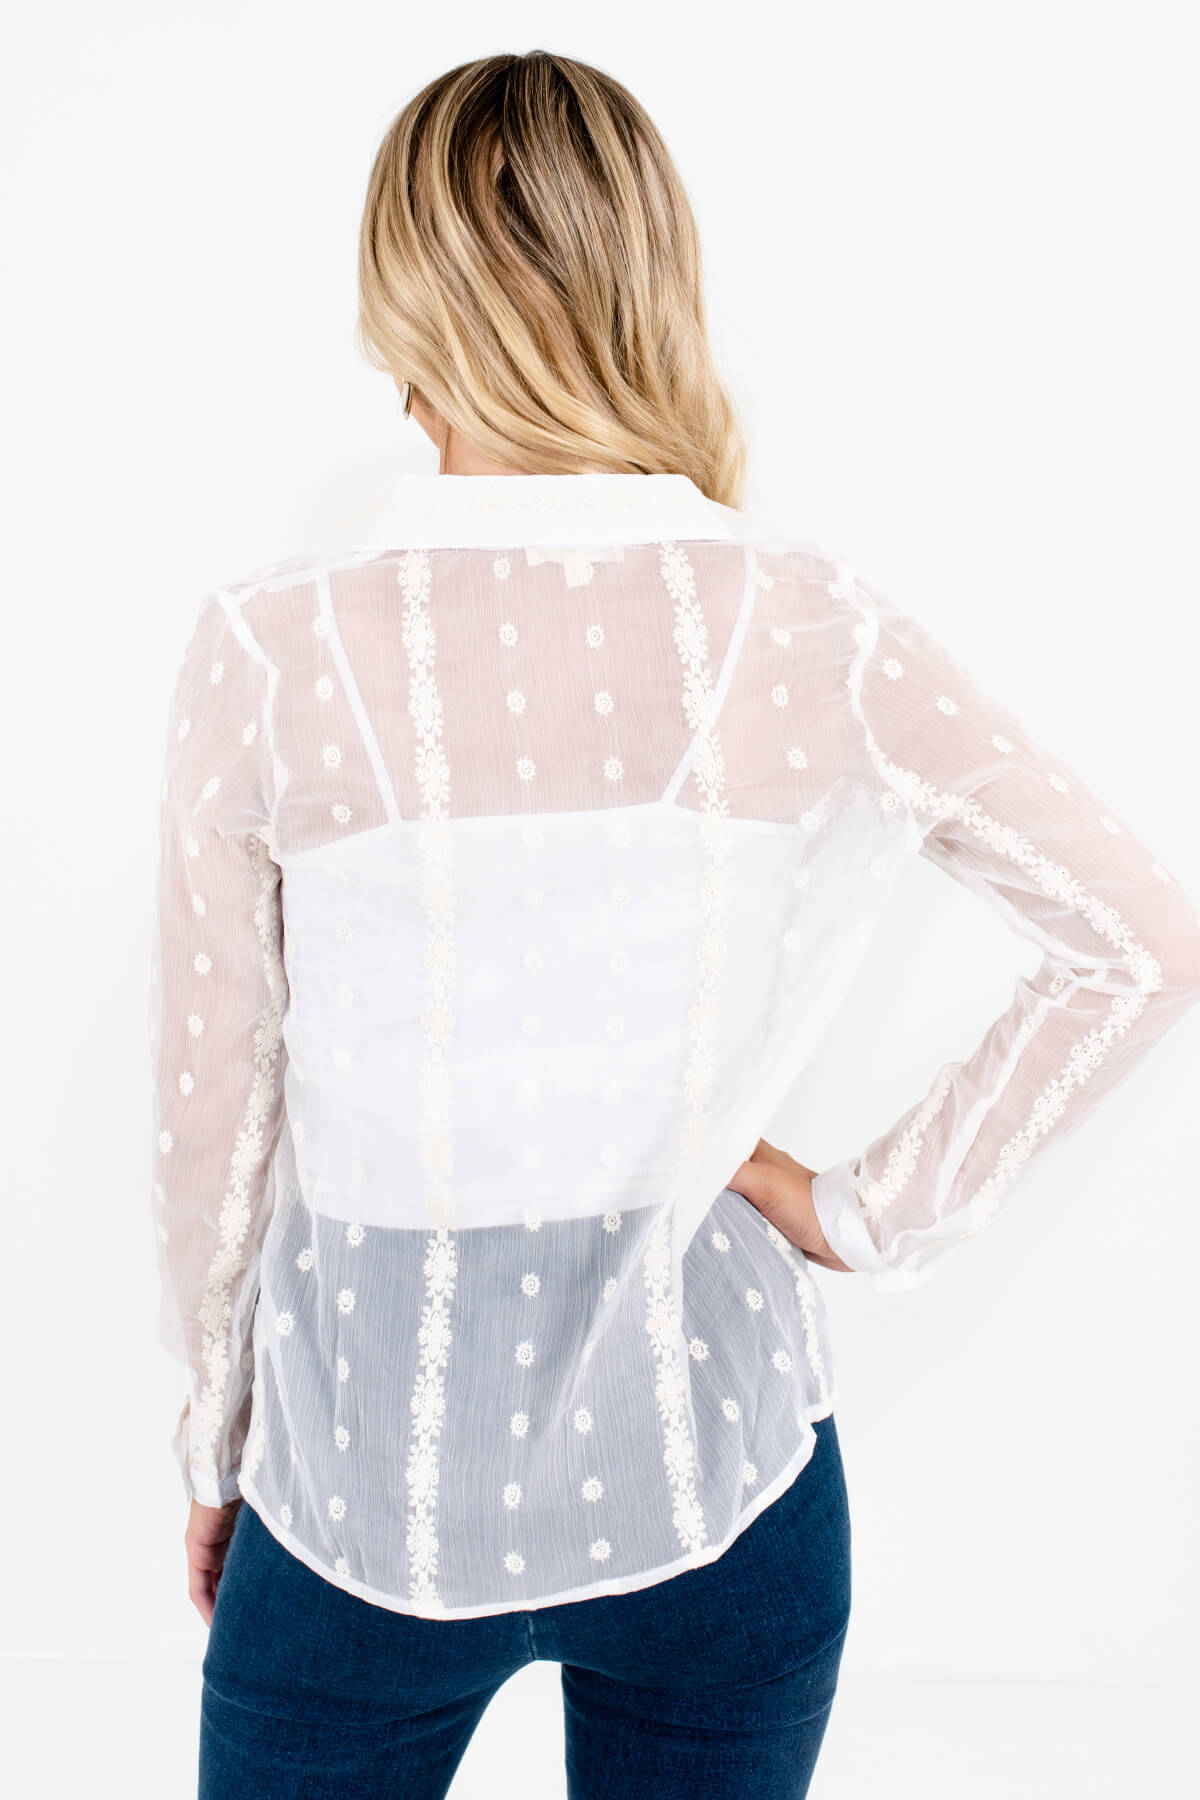 Sheer White Embroidered See-Through Button-Up Shirts